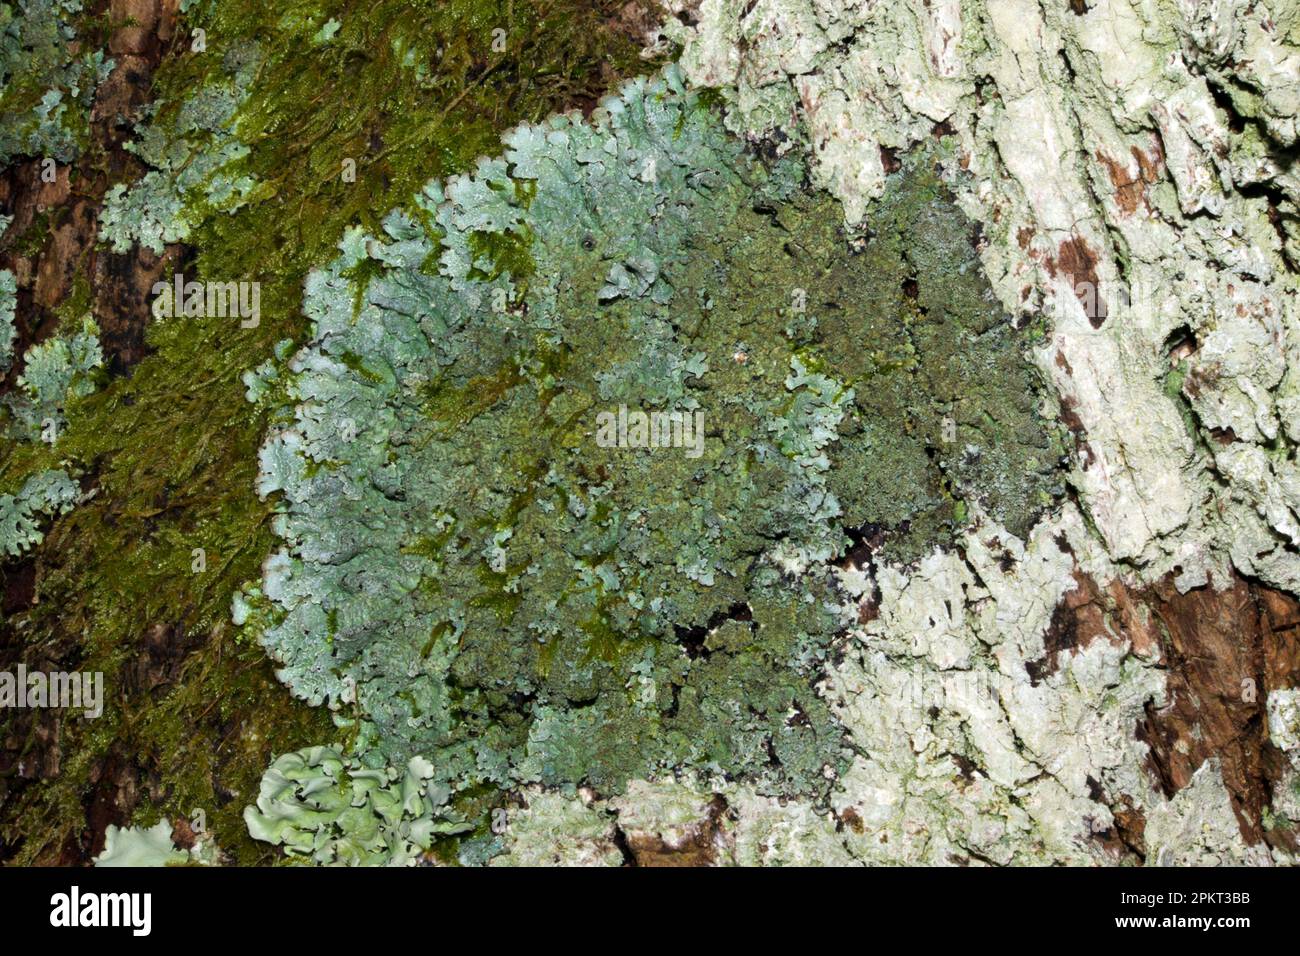 Parmelia sulcata is a common foliose lichen mainly found on trees. It is very tolerant of pollution and has a cosmopolitan distribution. Stock Photo